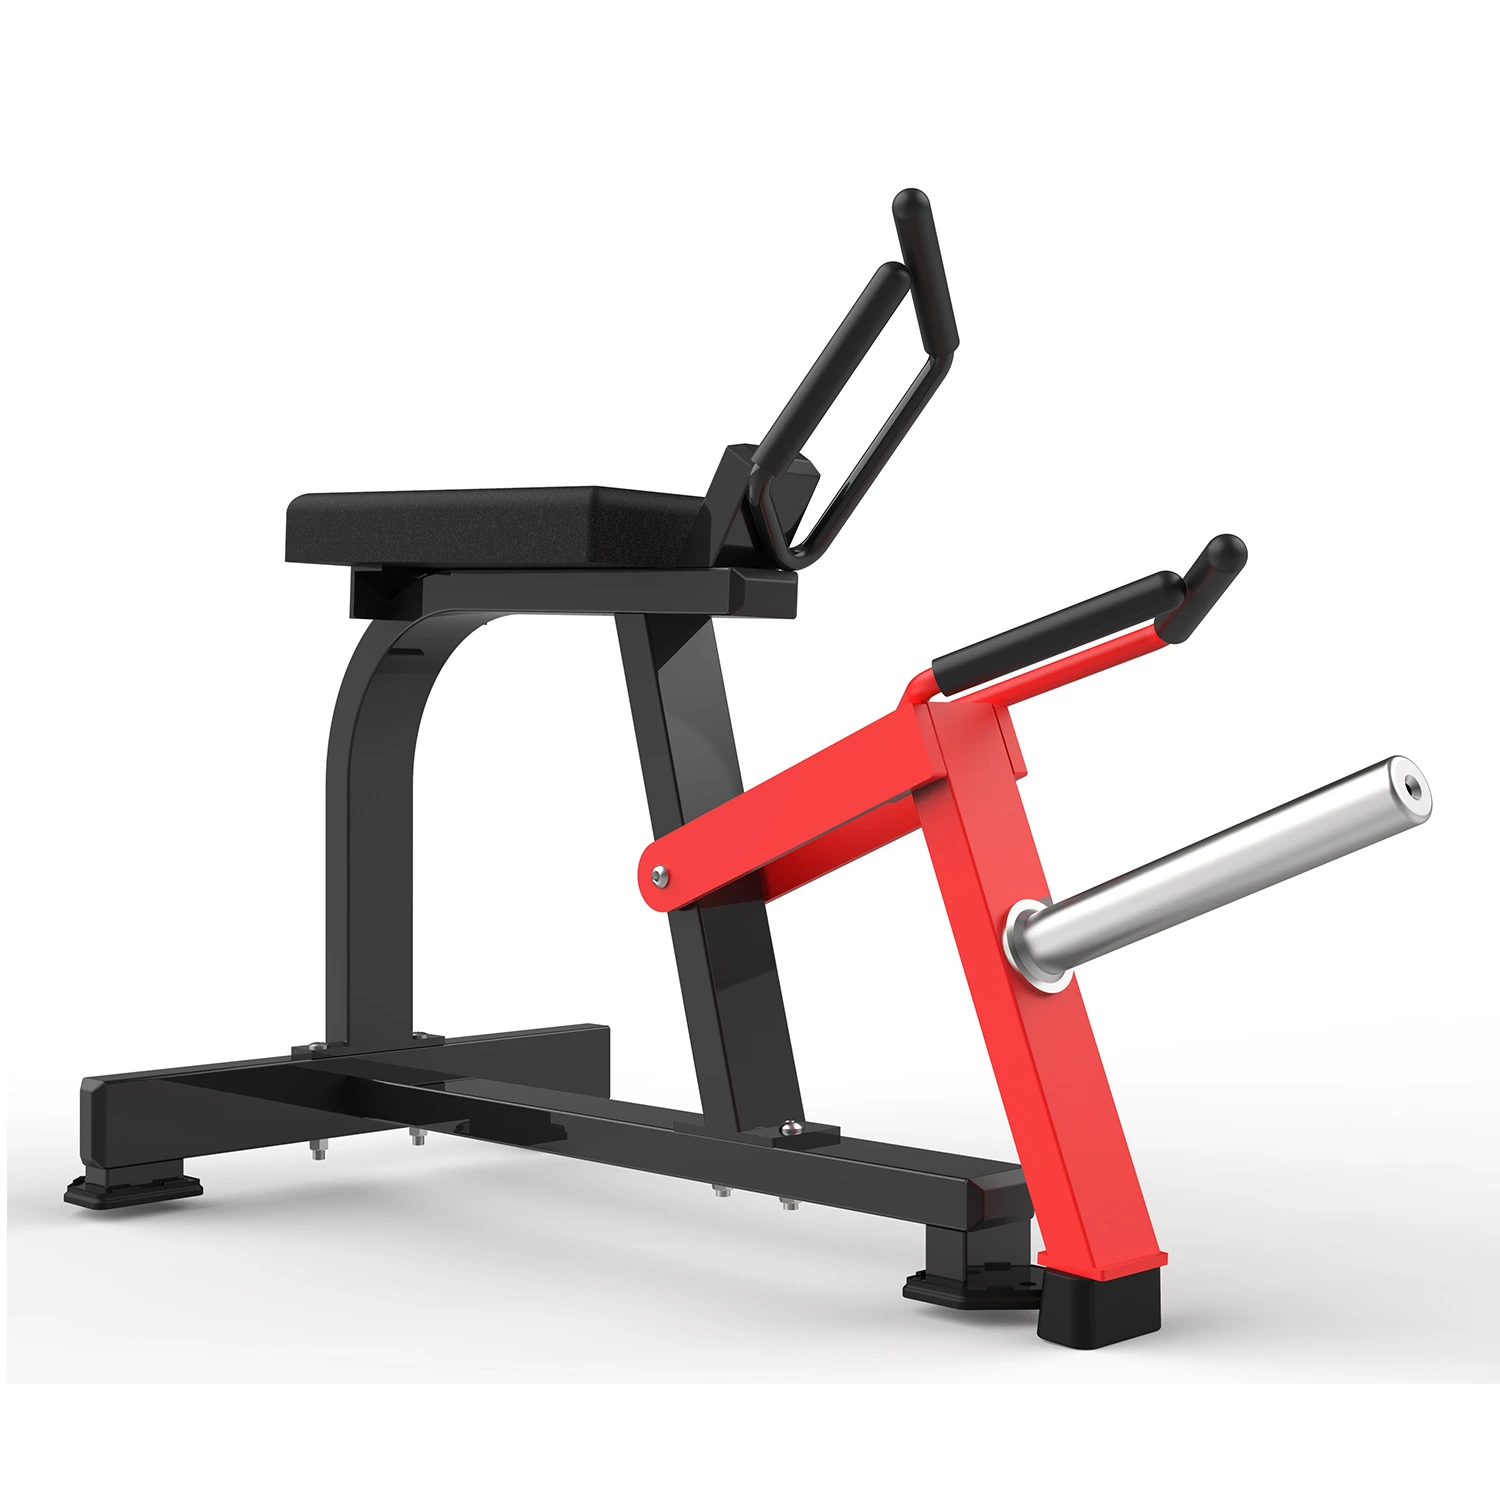 Realleader Chest Press Fitness Equipment Manufacture RS-1036